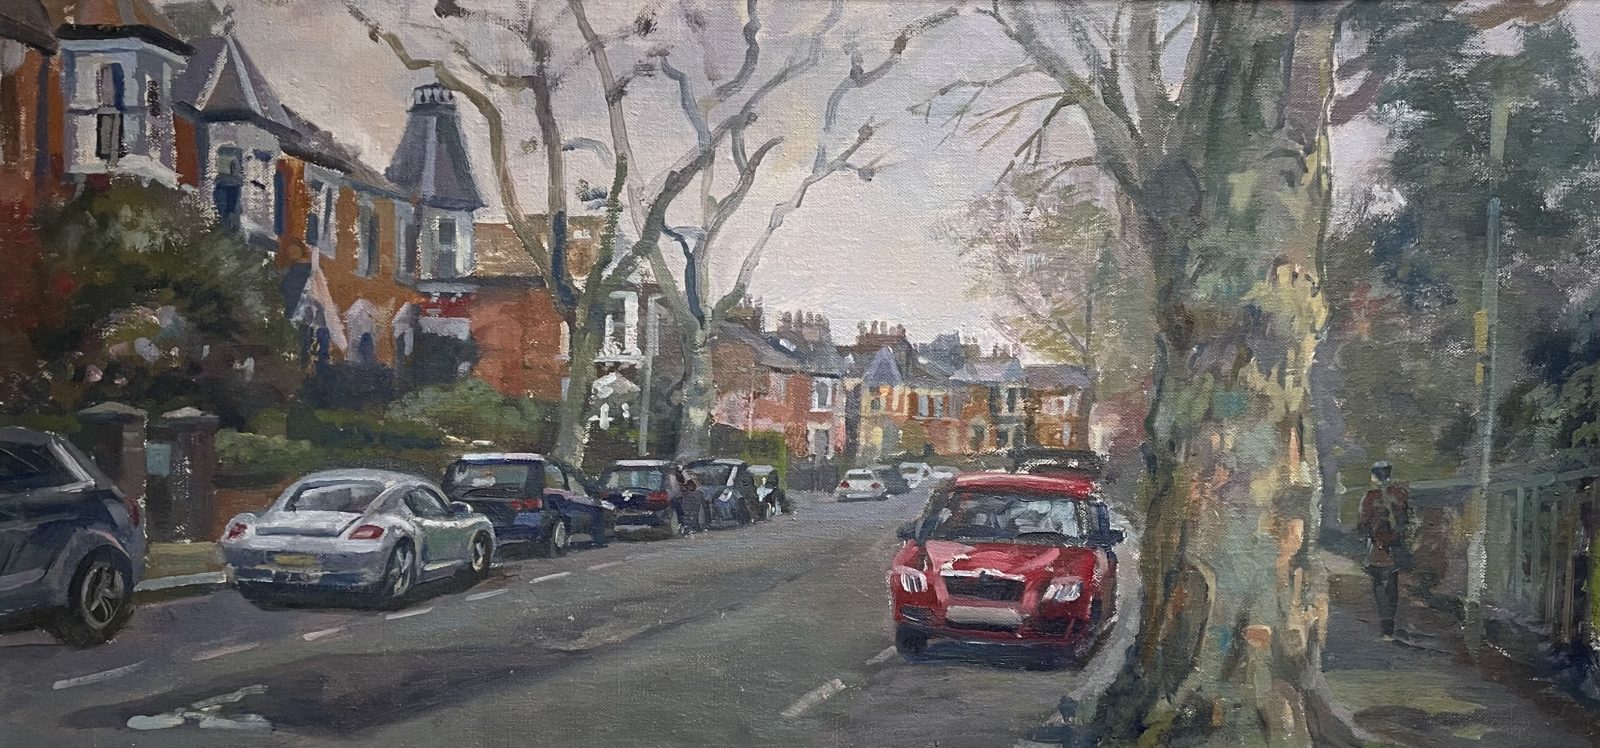 Autumn Day, Mount View Road, Crouch End 12 x 24 £595 (Sale price £450)